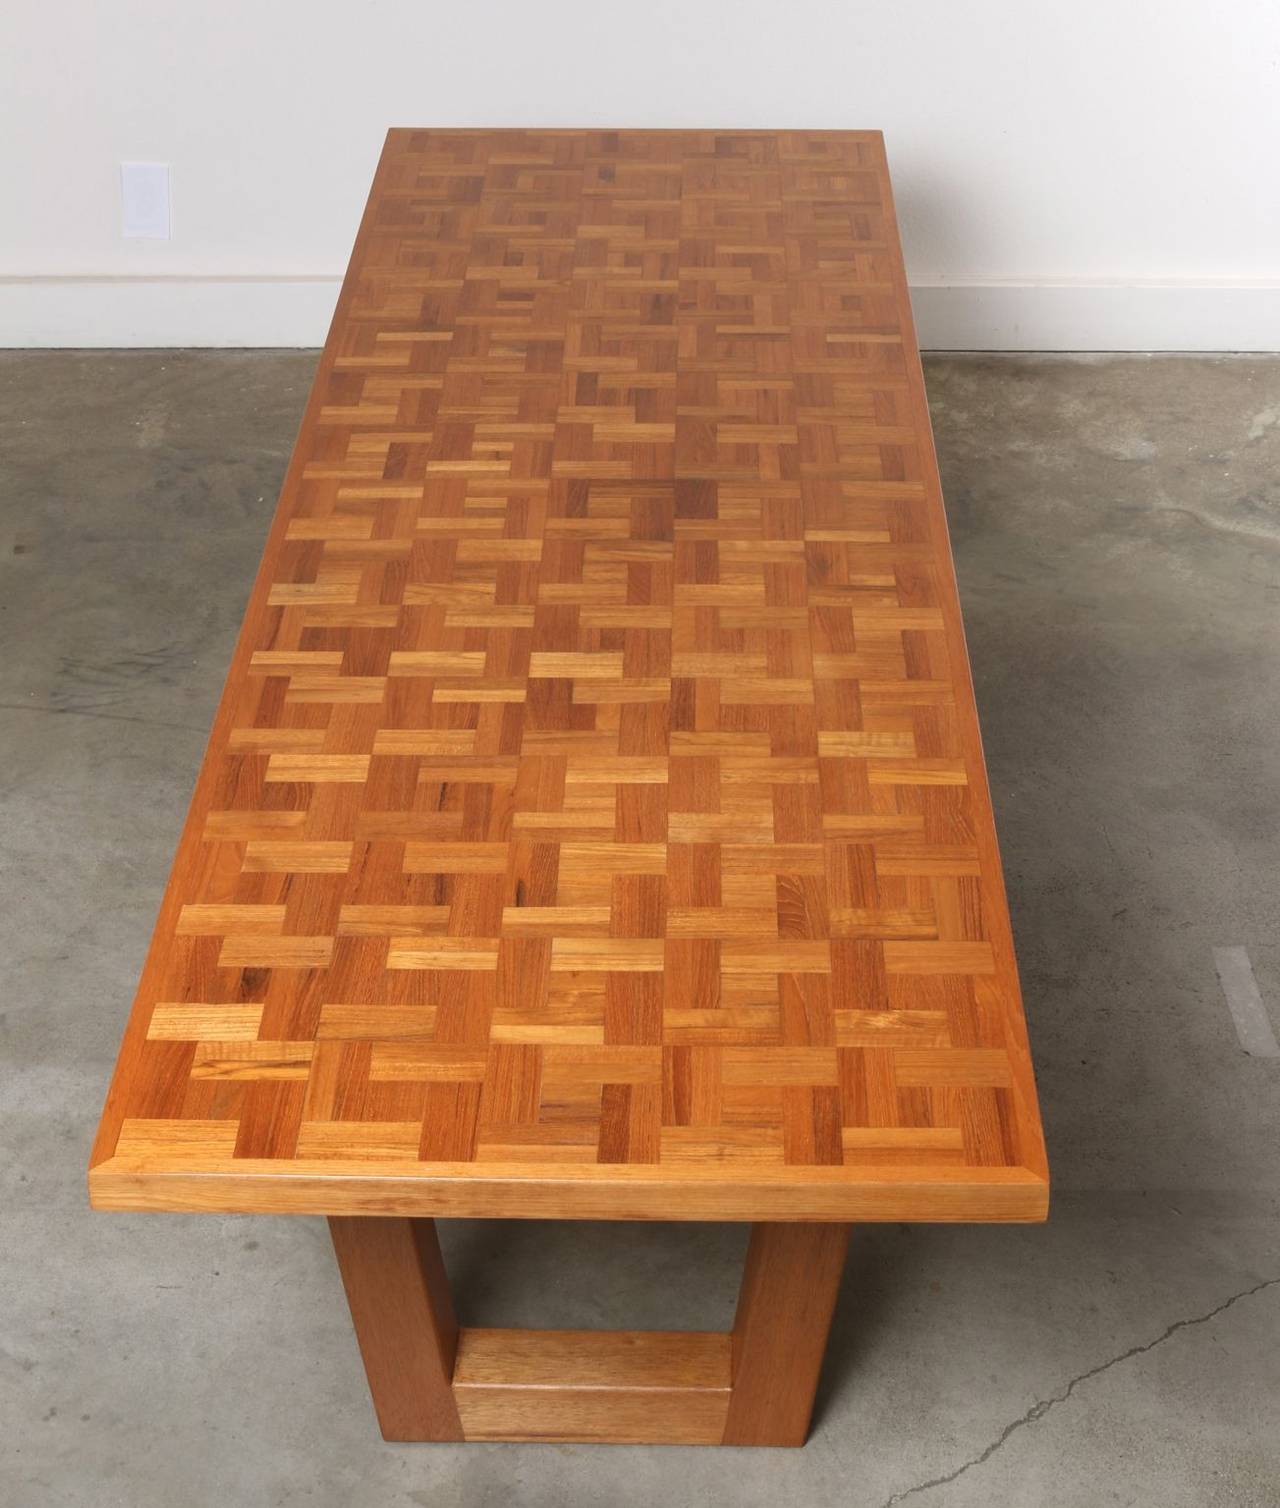 Eye-catching, unique and beautifully crafted 8 foot long artisan made table features expert workmanship, a timeless California design aesthetic and quality materials. The golden oak wood-block tabletop in the style of Mabel Hutchinson is supported